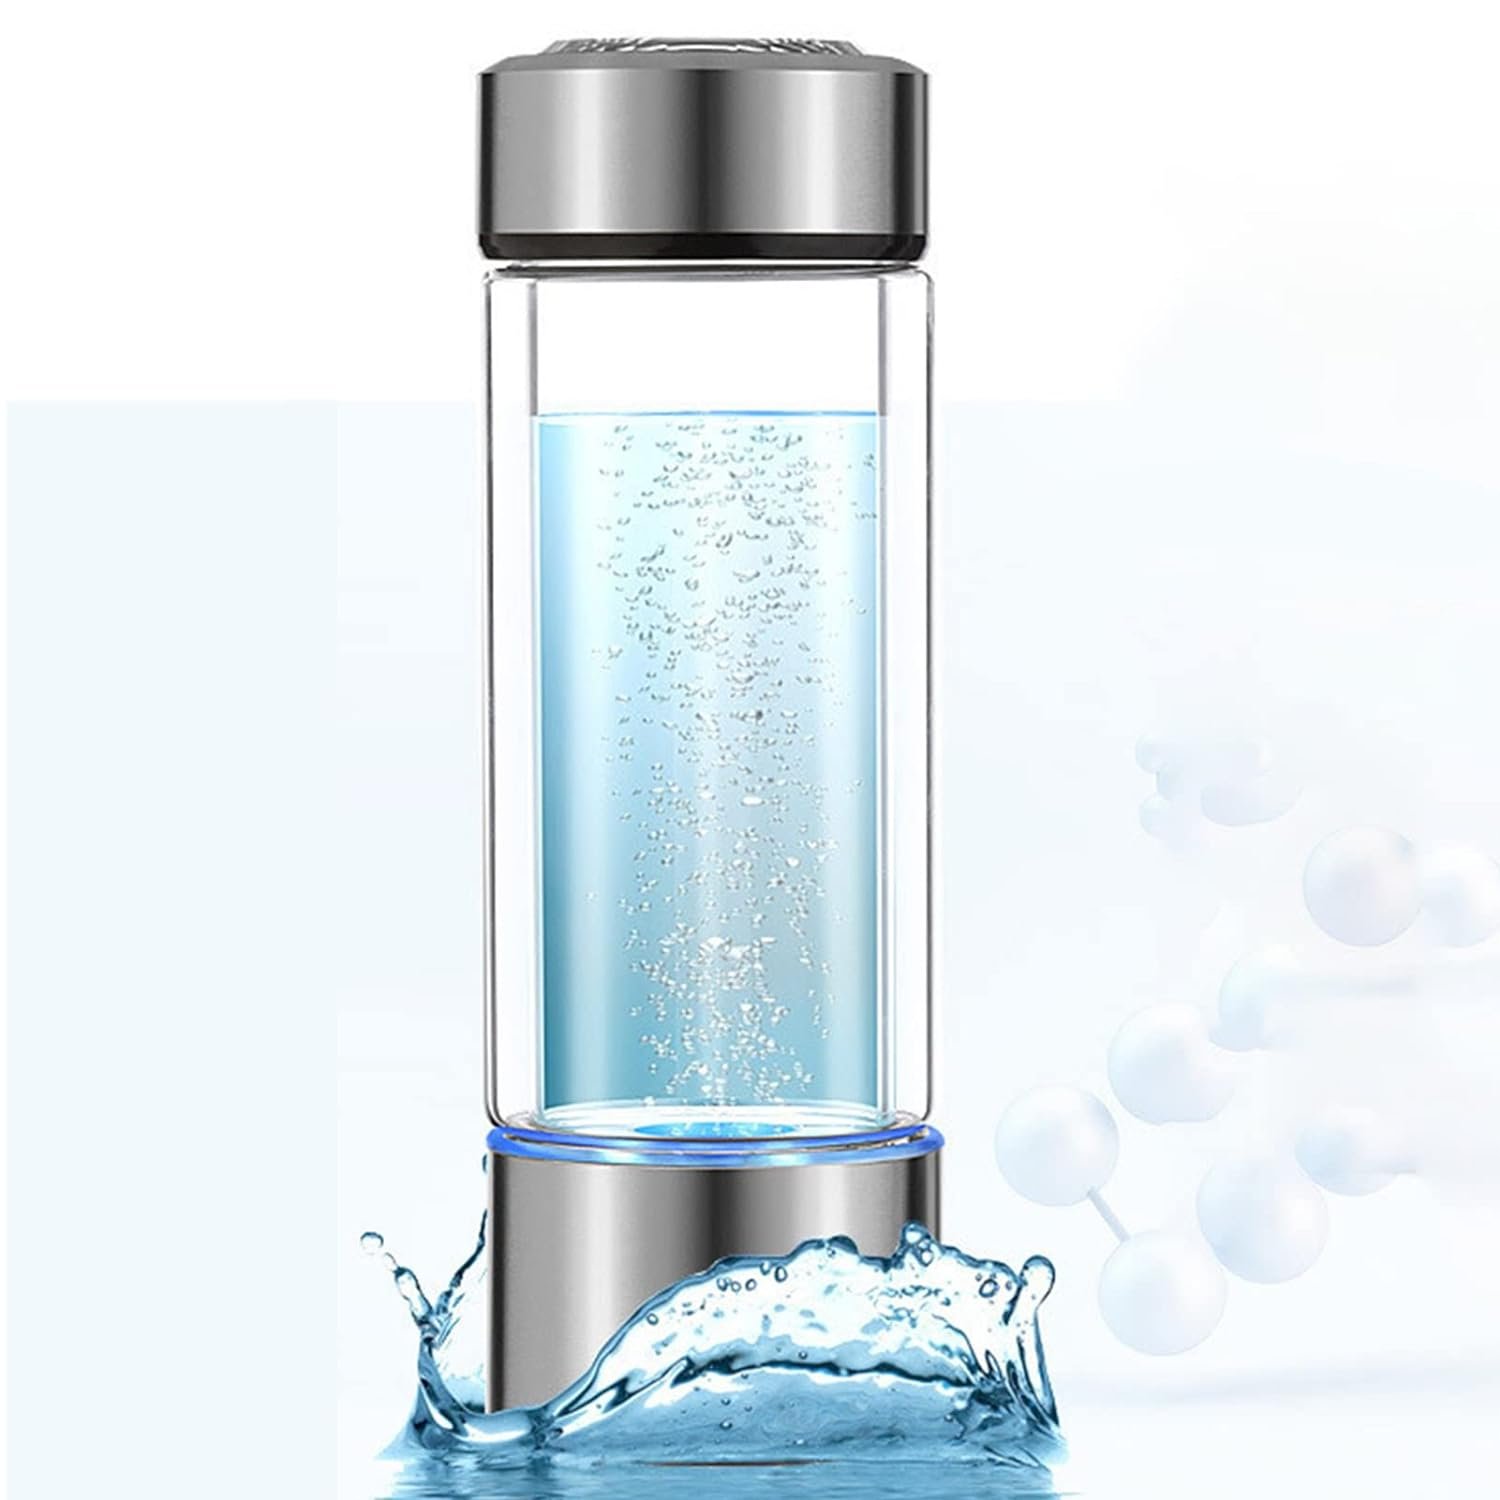 Hydrogen water: What is it used for and is it safe? 